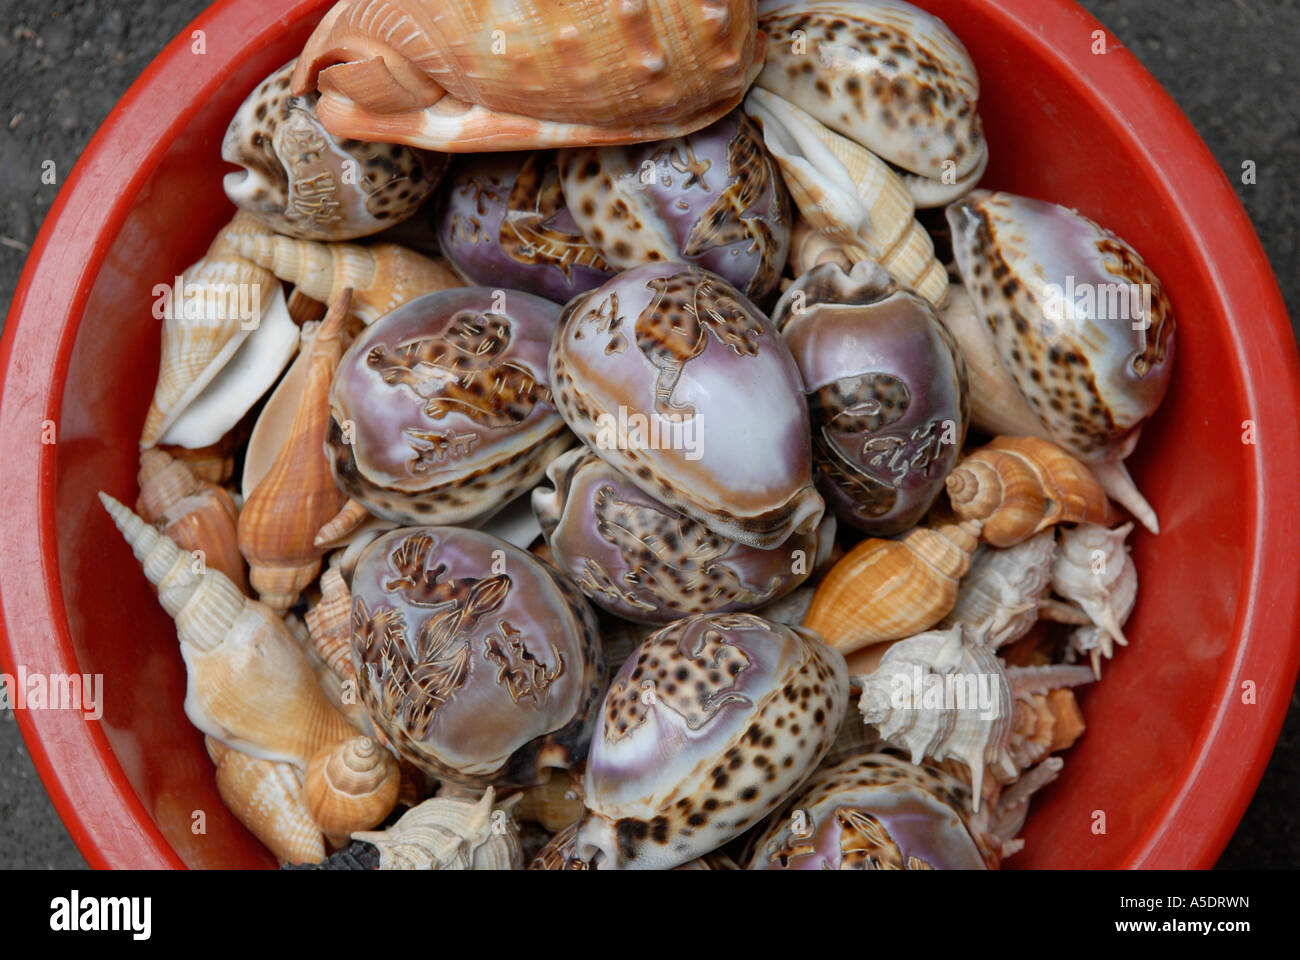 Hand-picked molluscan seashells for sale in Cat Street antique market Upper Lascar Row Hong Kong China Stock Photo